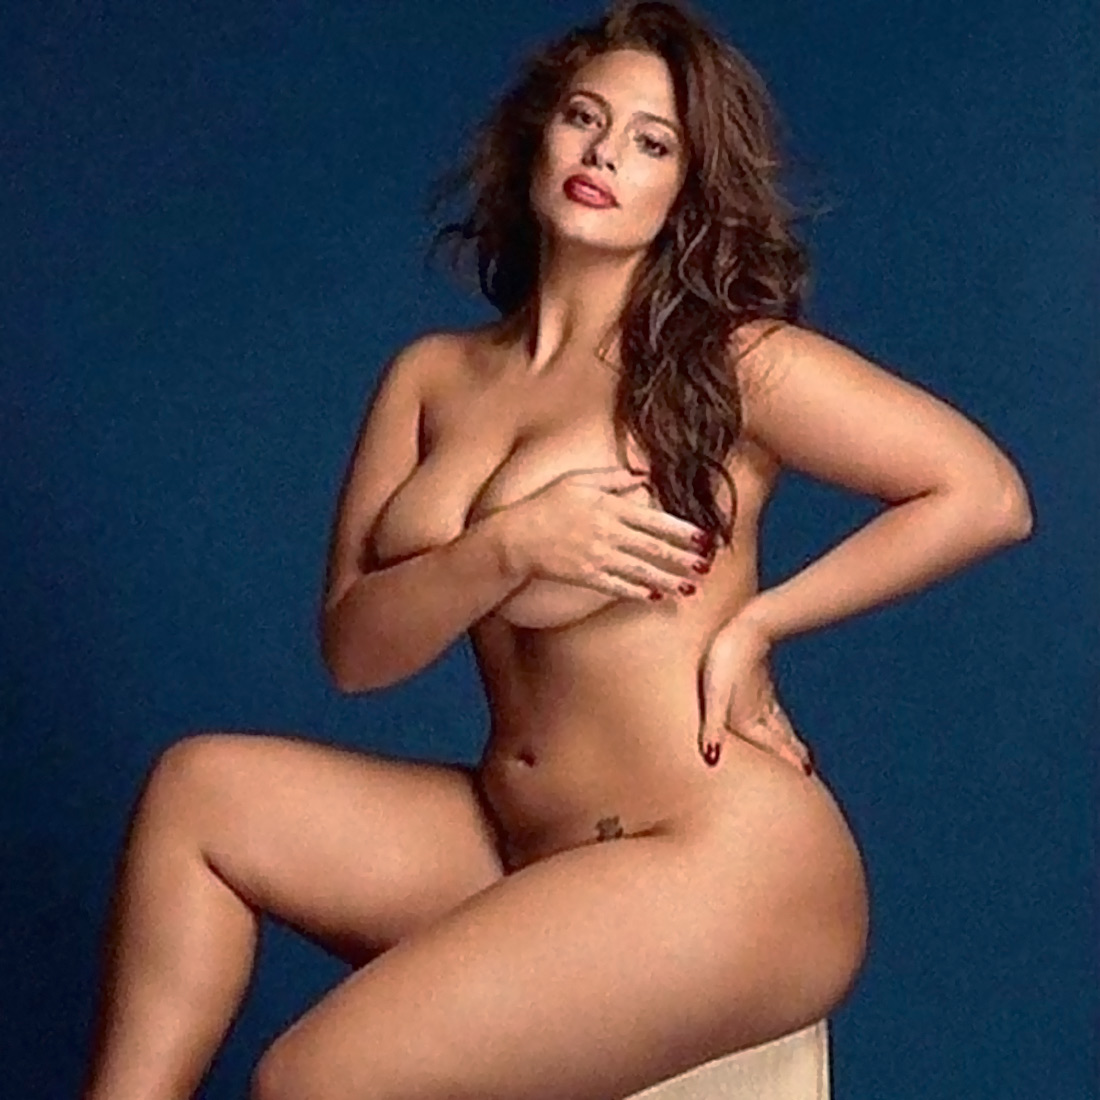 Plus size models nude pussy